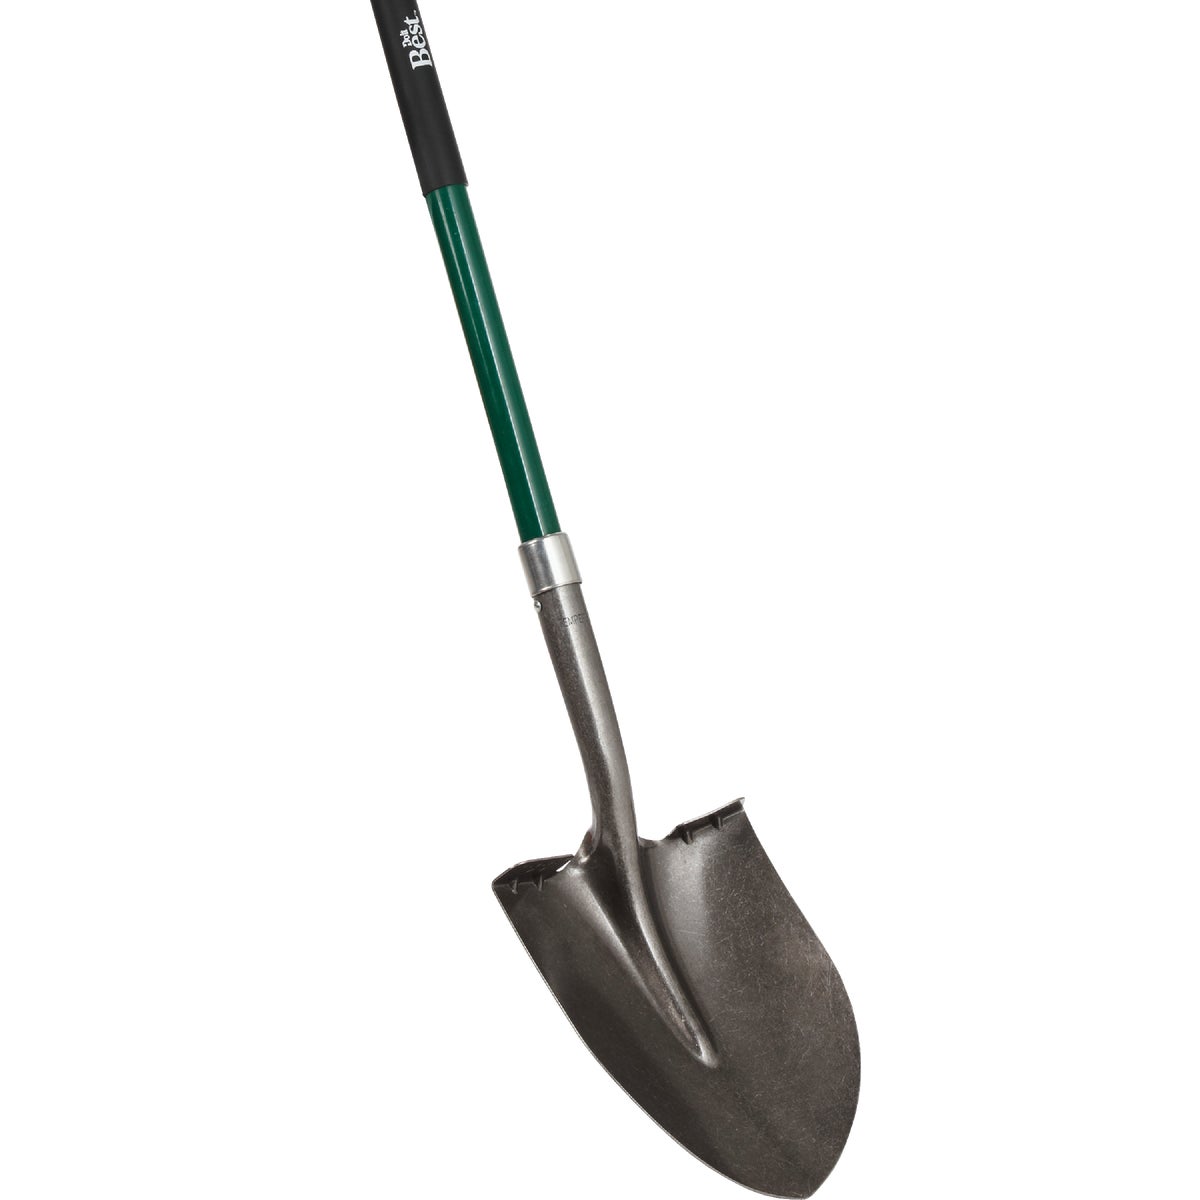 Item 736287, Round point shovel with 16-gauge, powder coated carbon steel blade with 